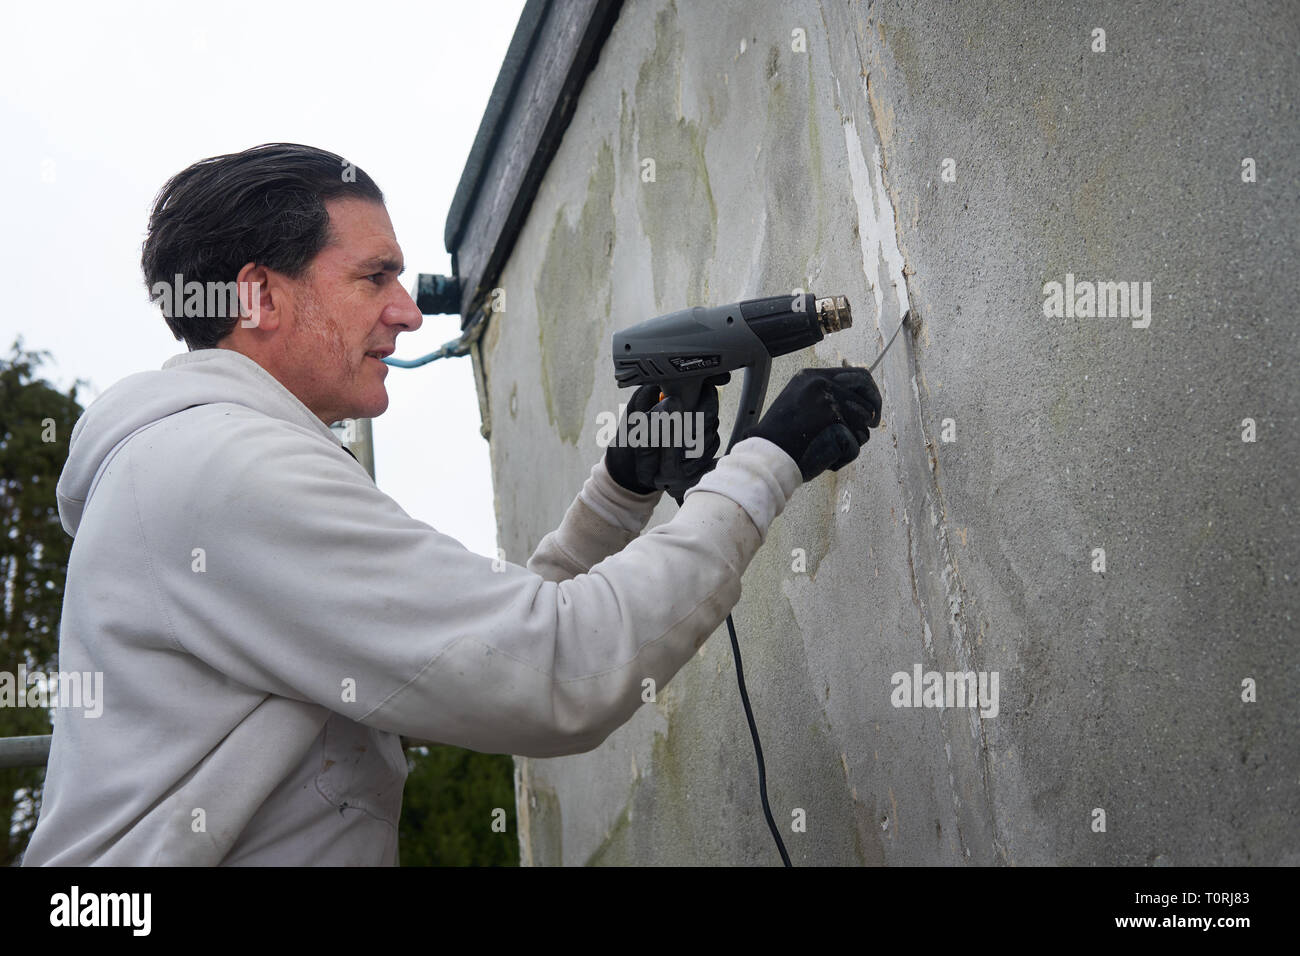 A builder, painter and decorator using a heat gun working on the wall of a house. Stock Photo